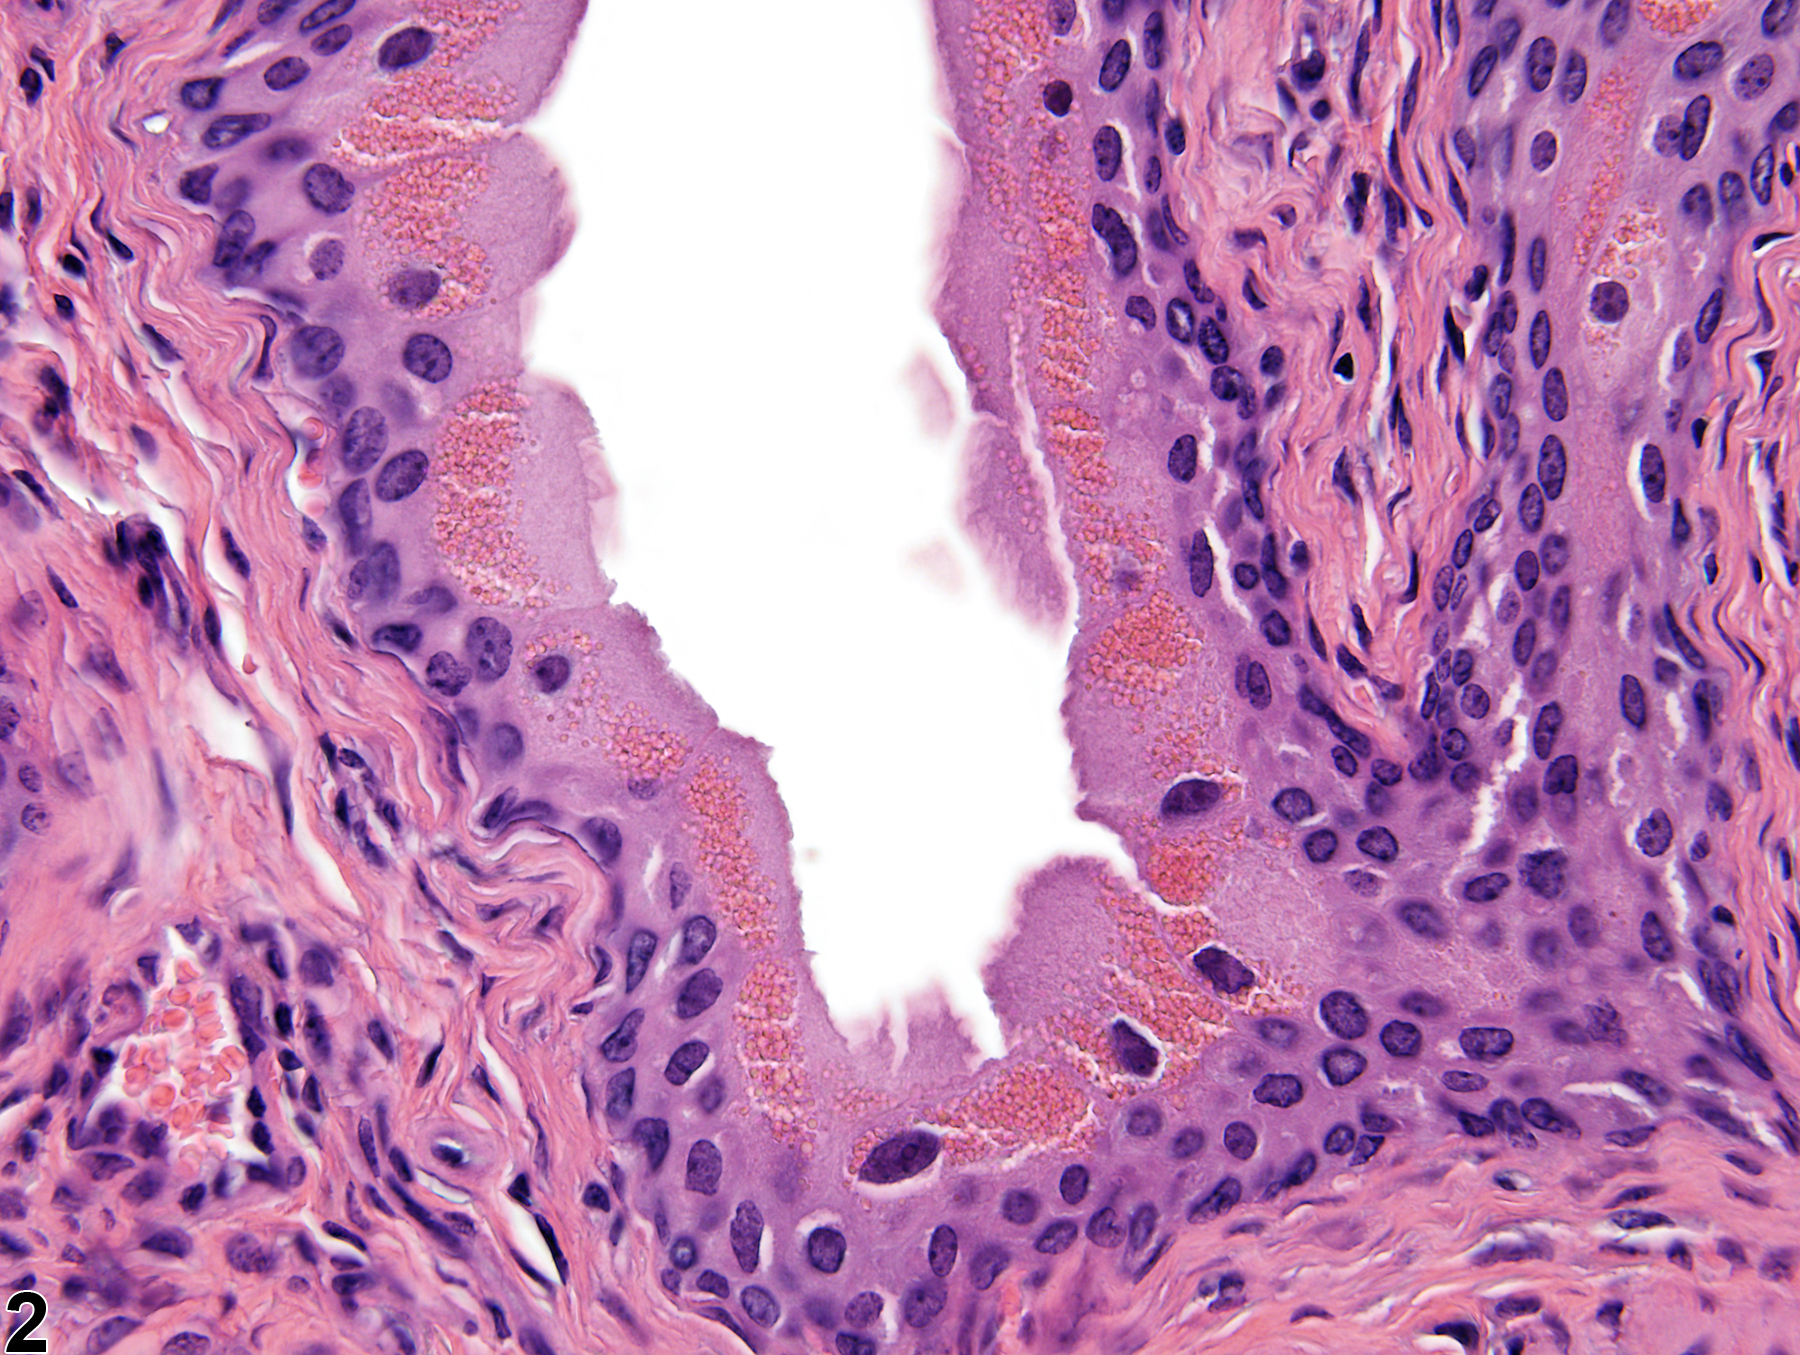 Image of cytoplasmic granules in the urinary bladder from a male B6C3F1 mouse in a subchronic study